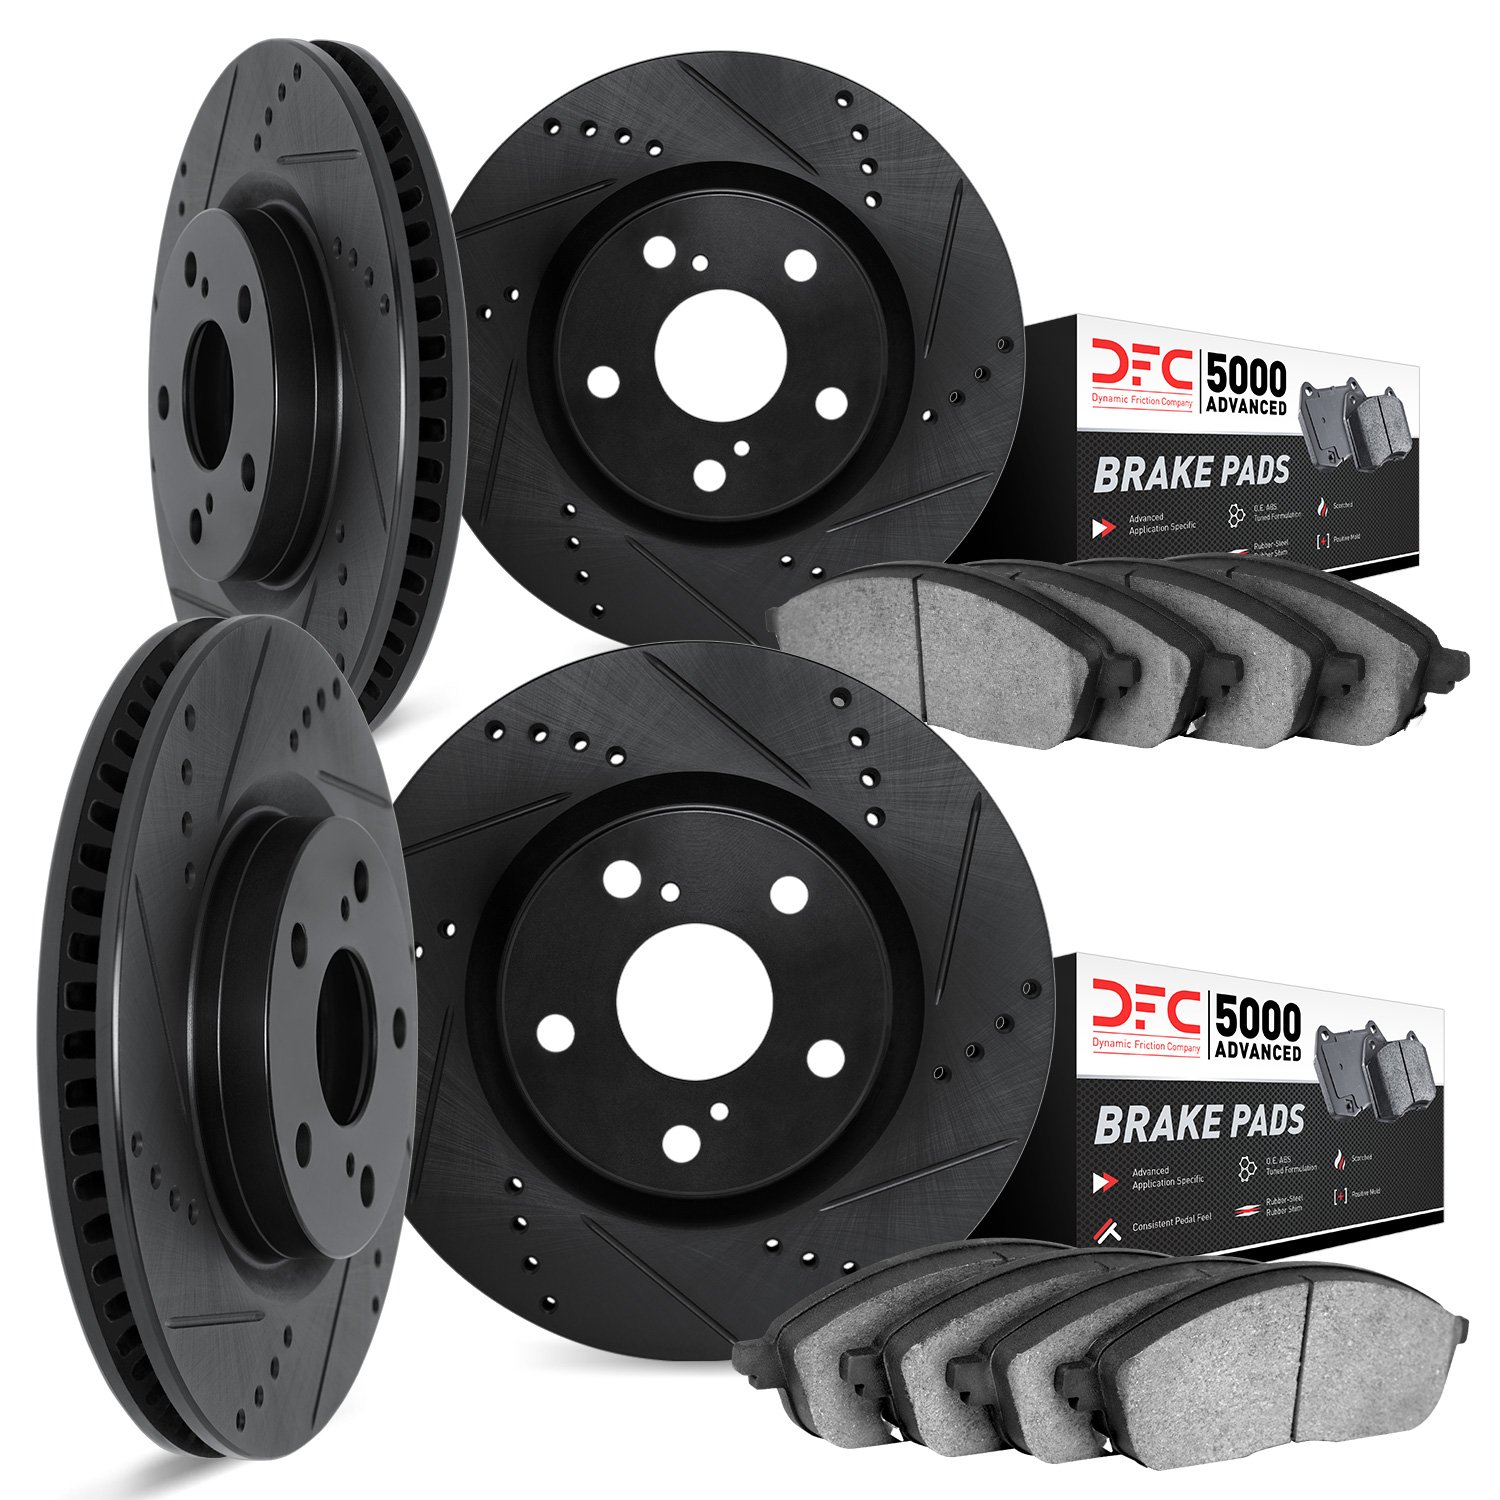 8504-45032 Drilled/Slotted Brake Rotors w/5000 Advanced Brake Pads Kit [Black], 2010-2017 GM, Position: Front and Rear